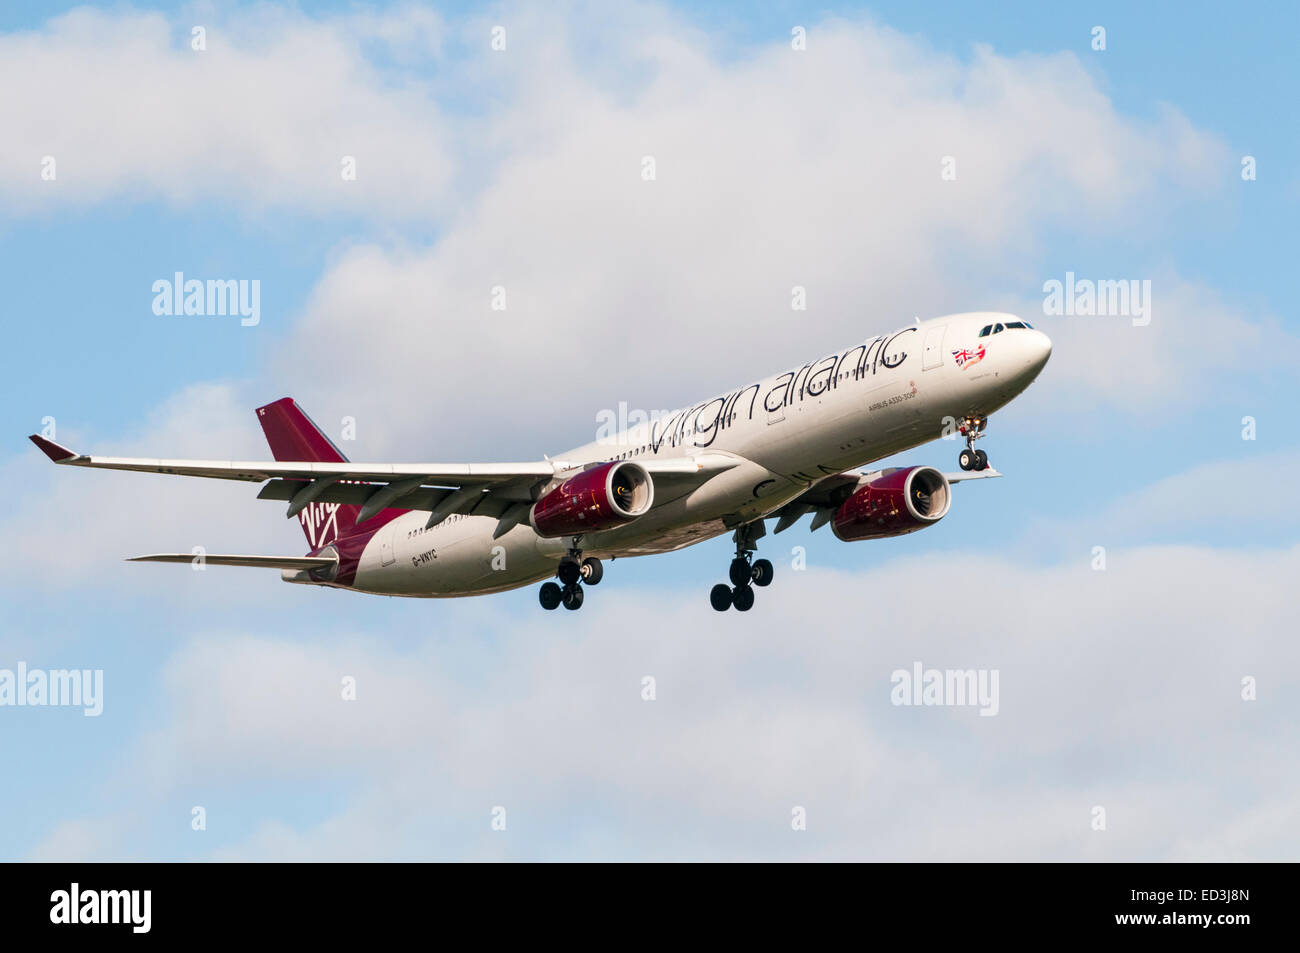 Virgin Atlantic Airbus A330 aircraft coming in to land Stock Photo